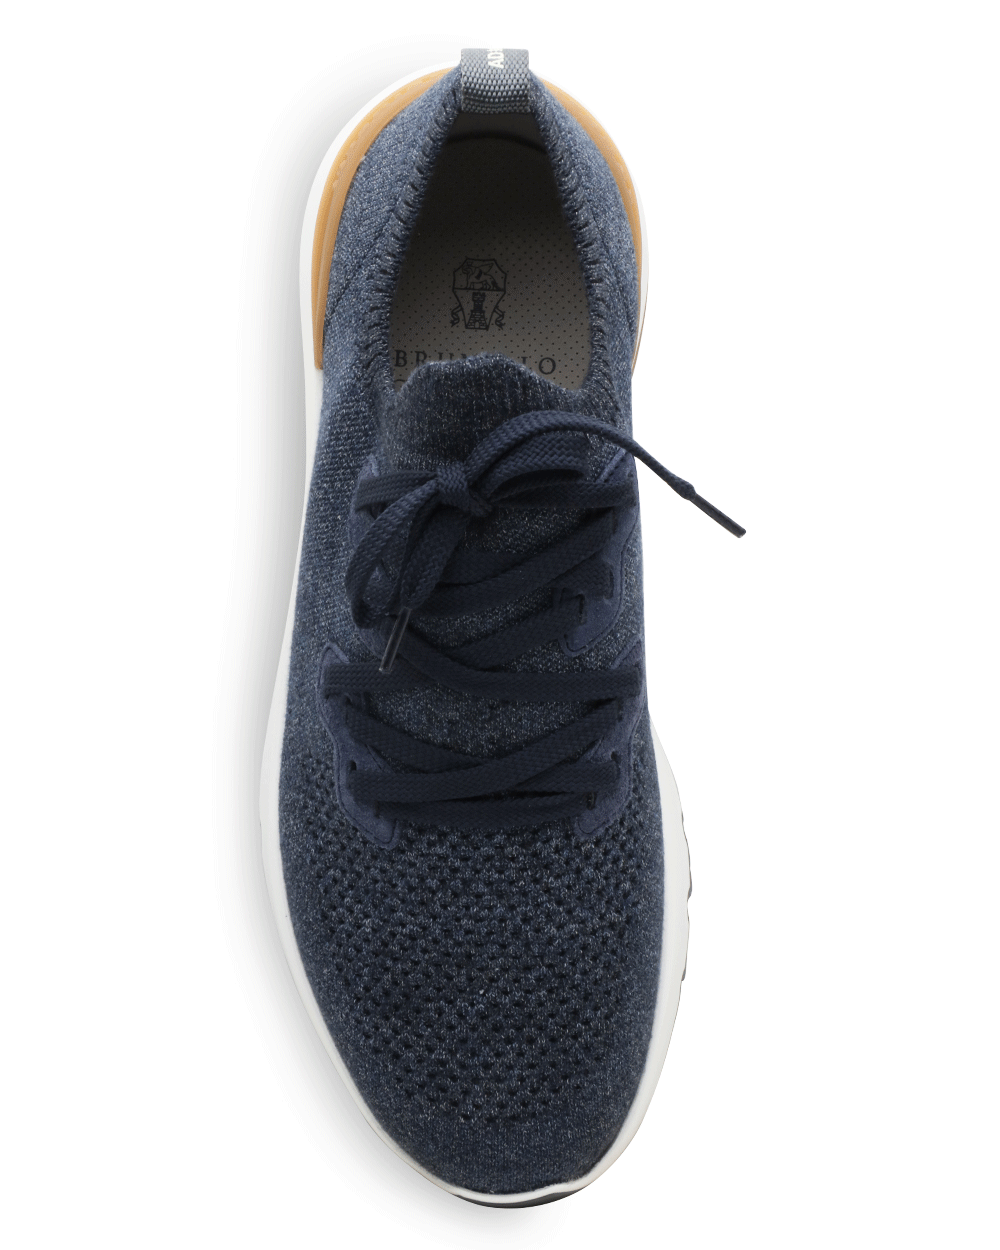 Cucinelli Knit Sneaker in Navy and Grey